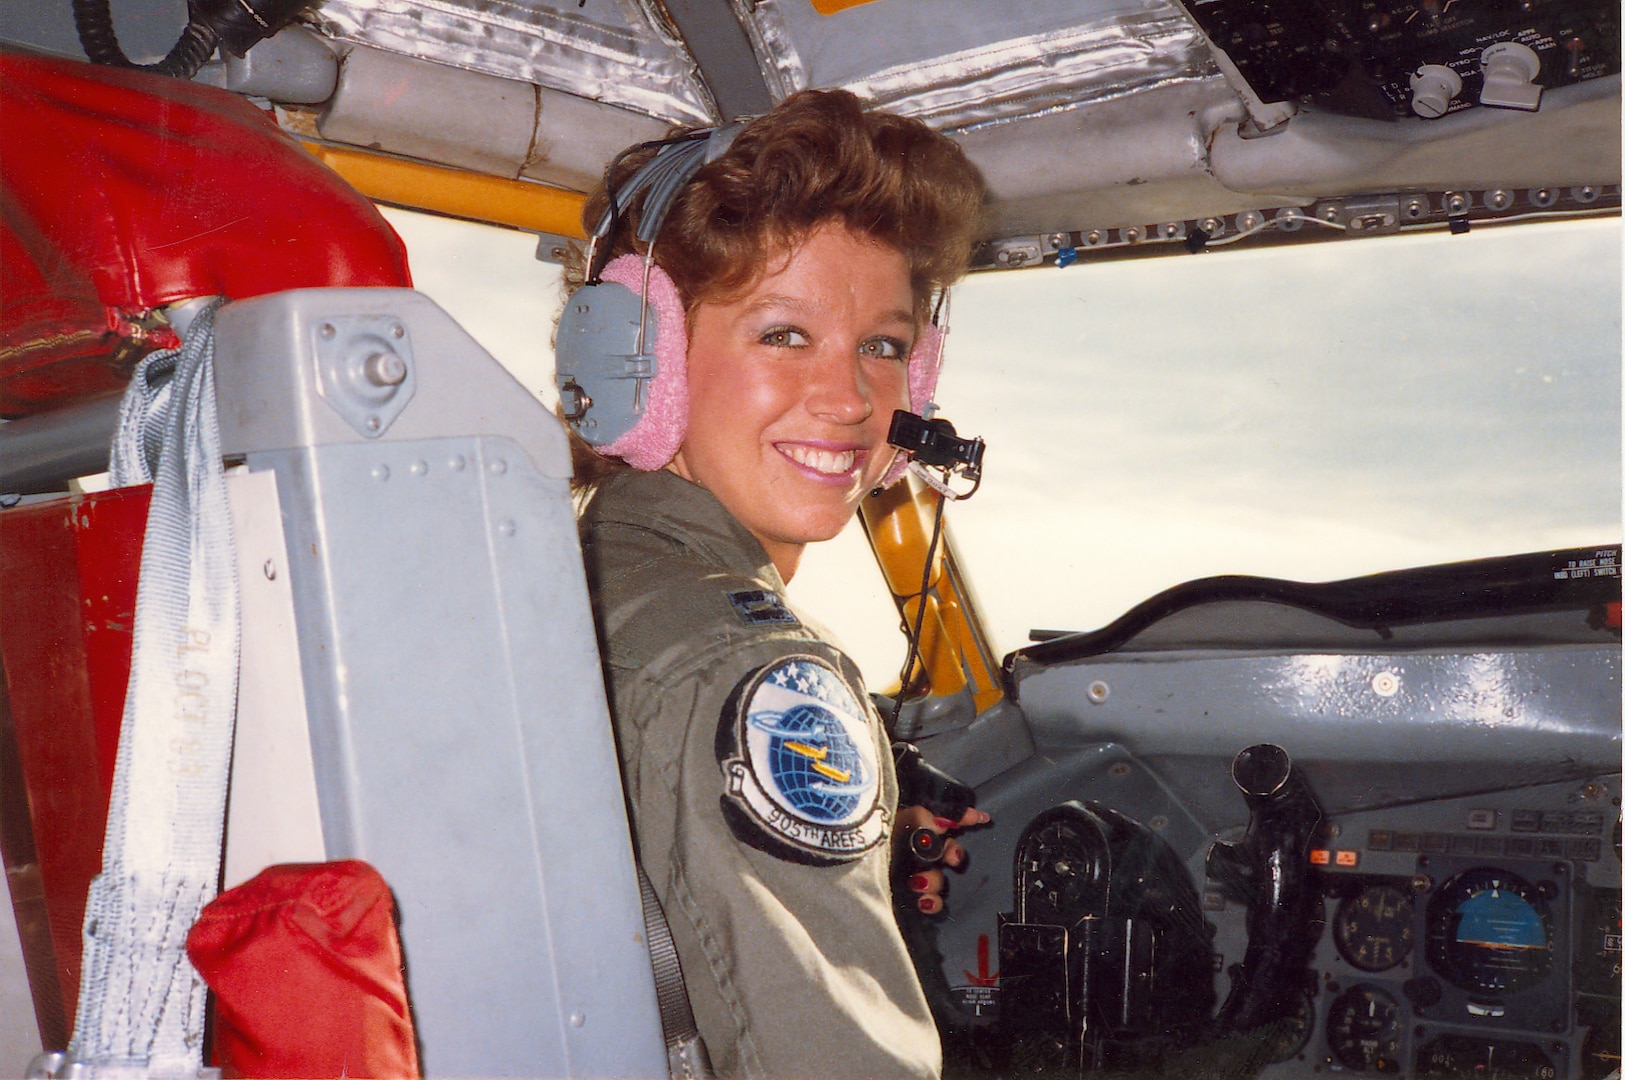 Then-Capt. Allison Hilsman piloting the KC-135 at Grand Forks Air Force Base, N.D. in 1984. Hickey was the first female aircraft commander at the installation.